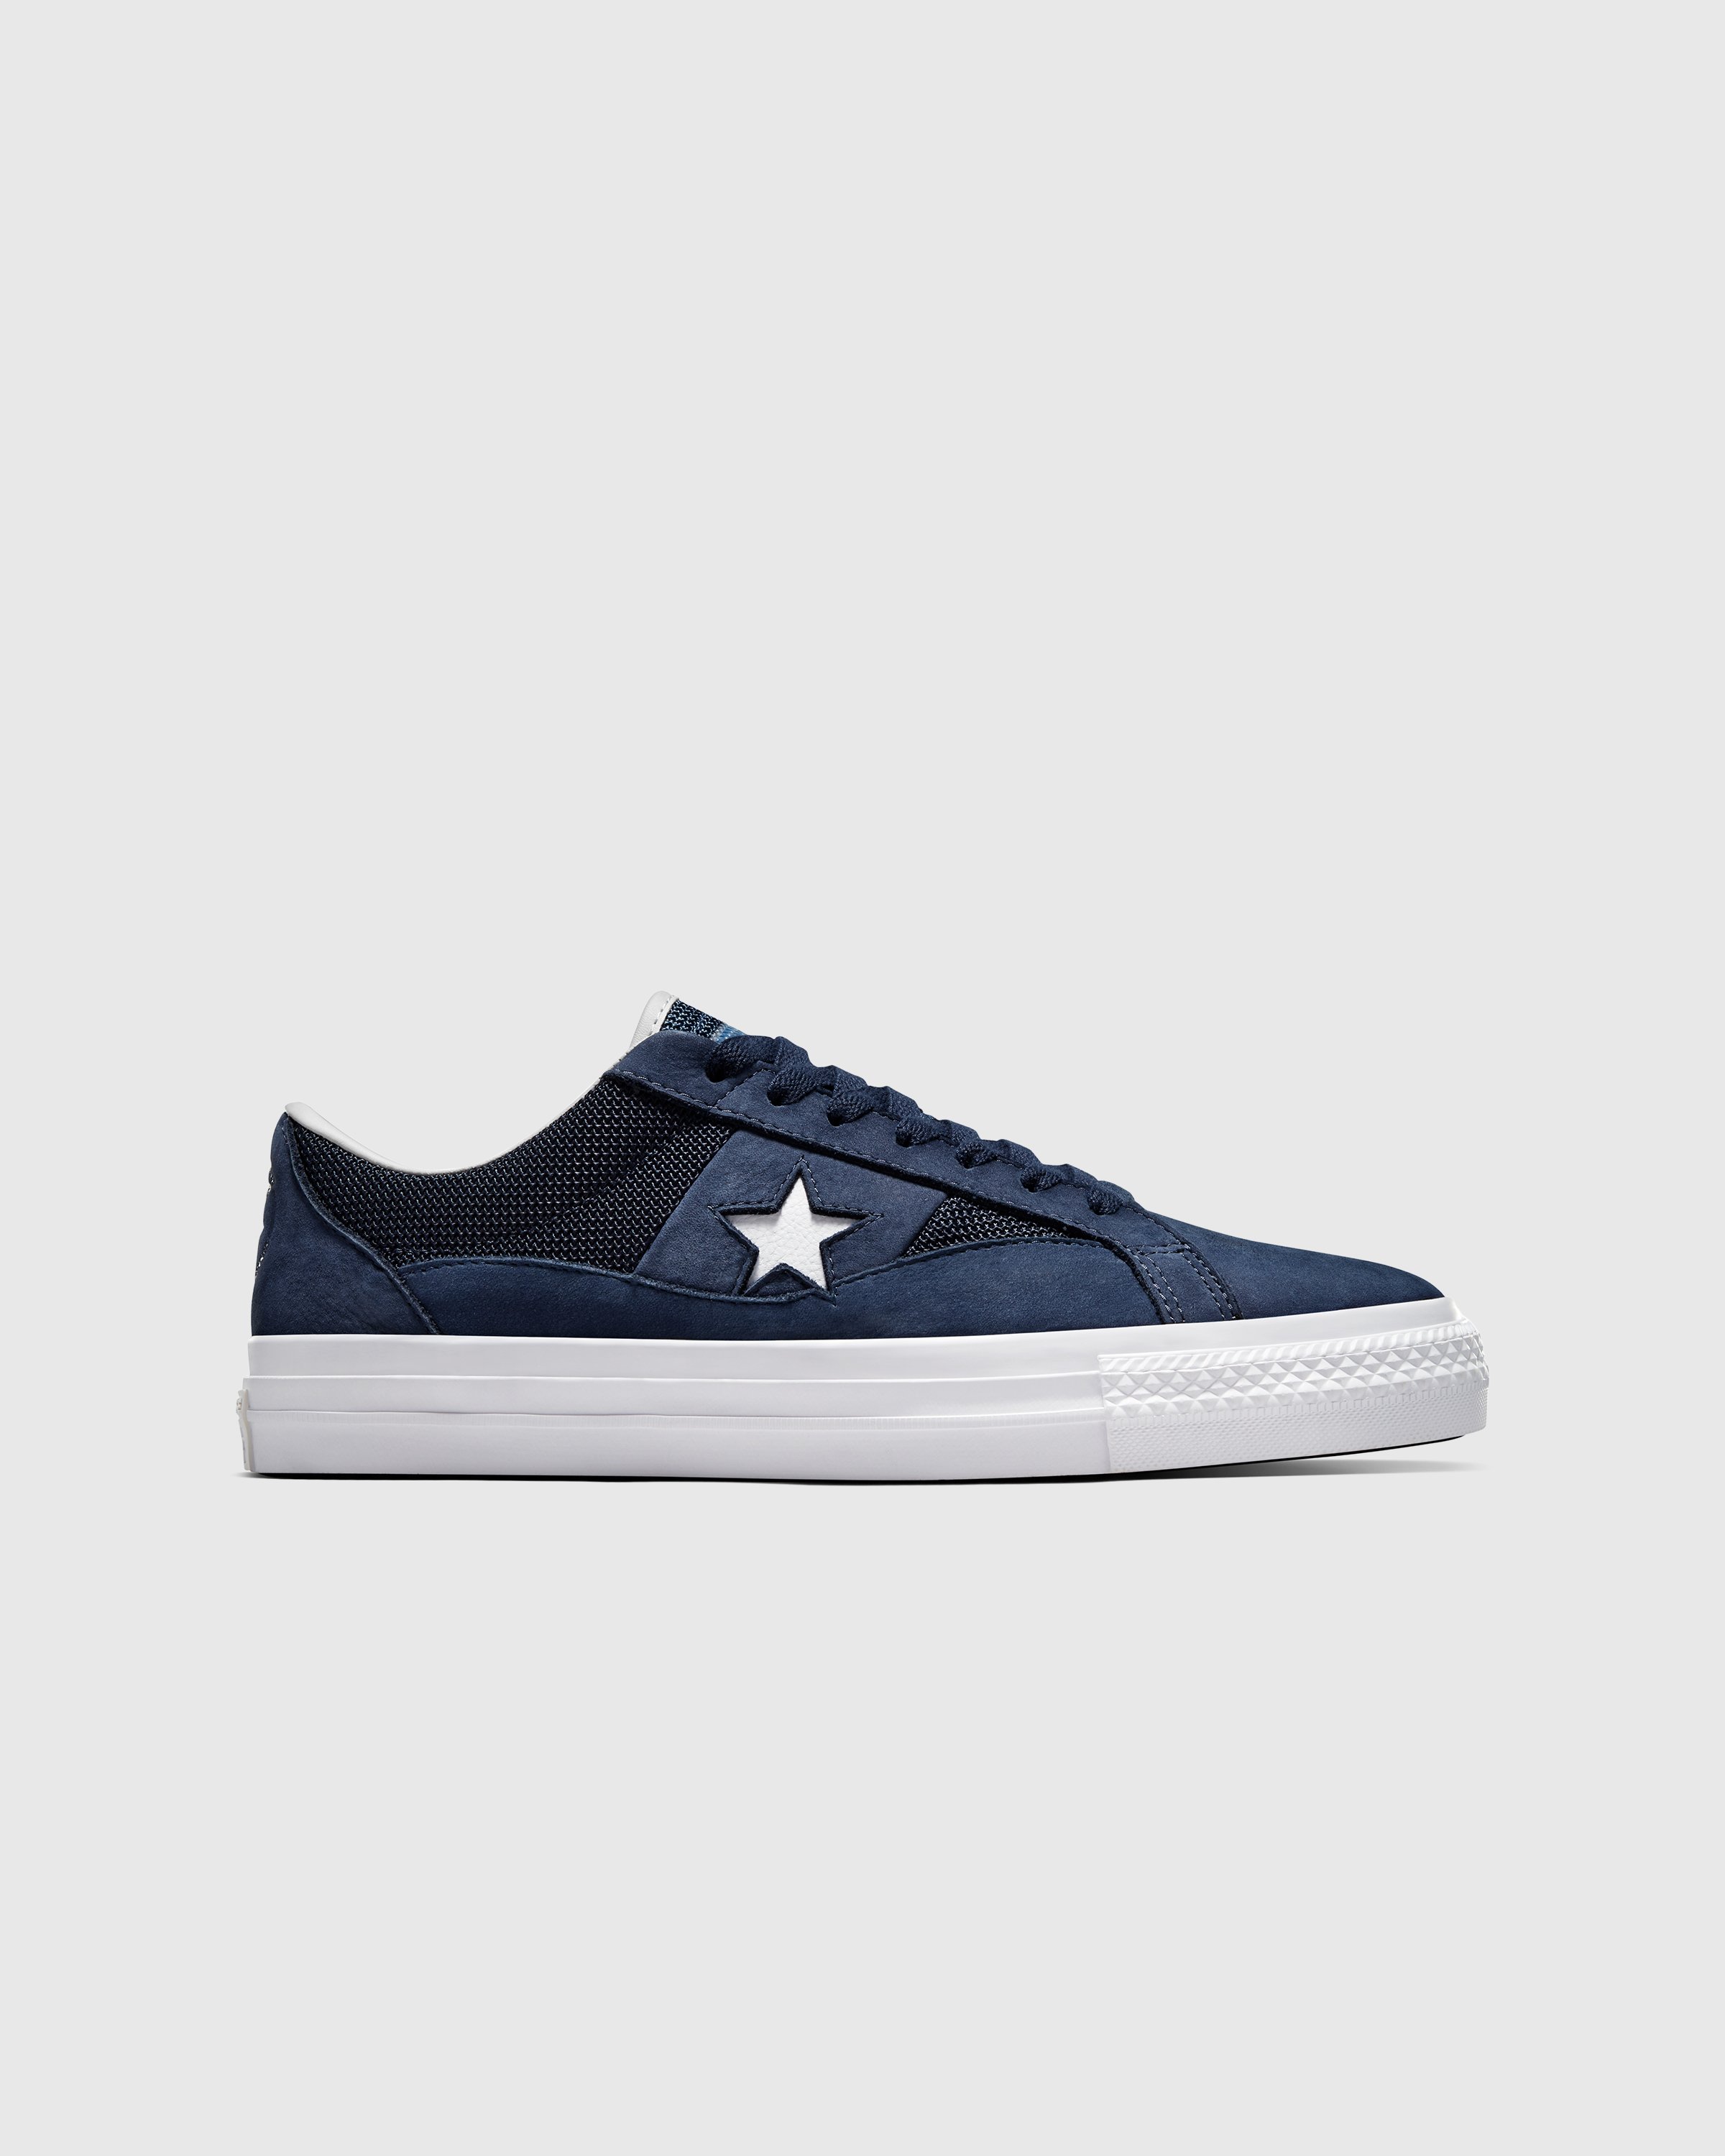 Converse - CONS x Alltimers ONE STAR PRO OX Midnight Navy/Navy - Footwear - Blue - Image 1